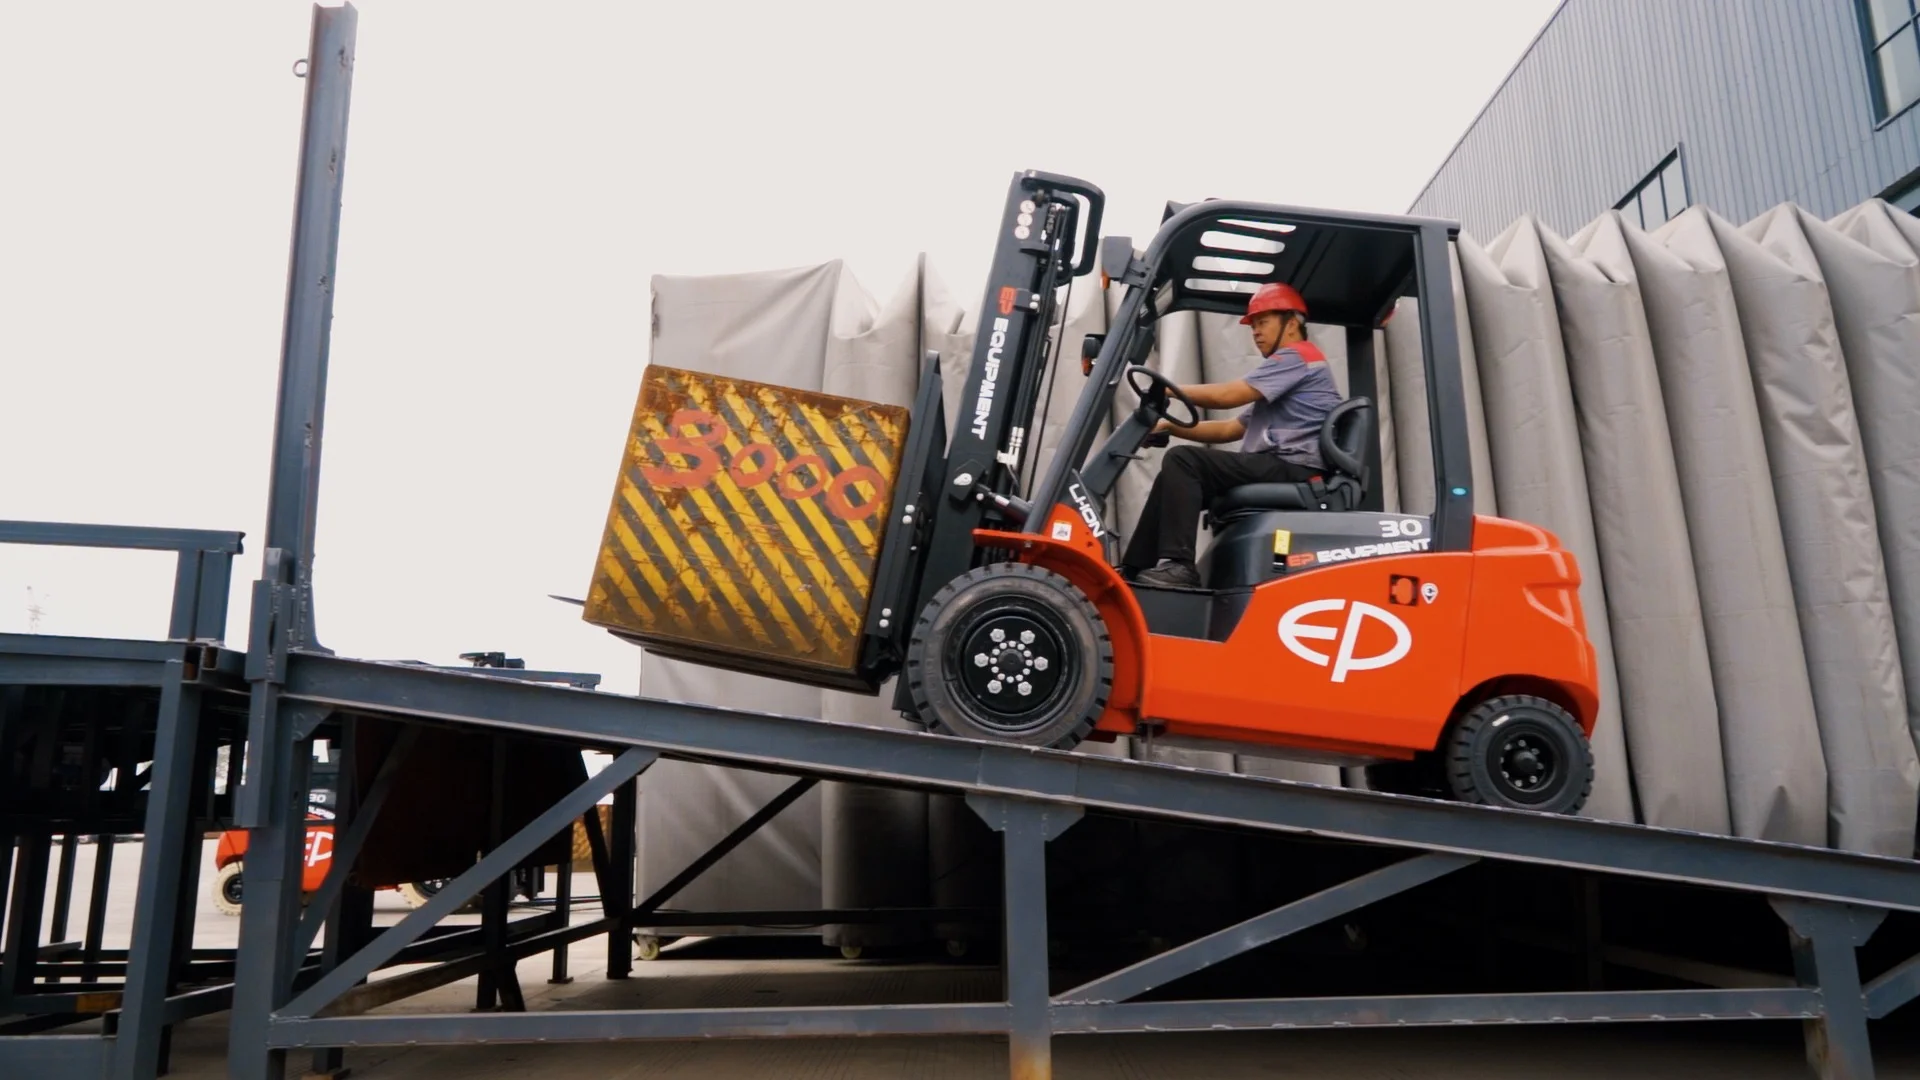 EFL3 Series electric counterbalance forklift being operated on a ramp.